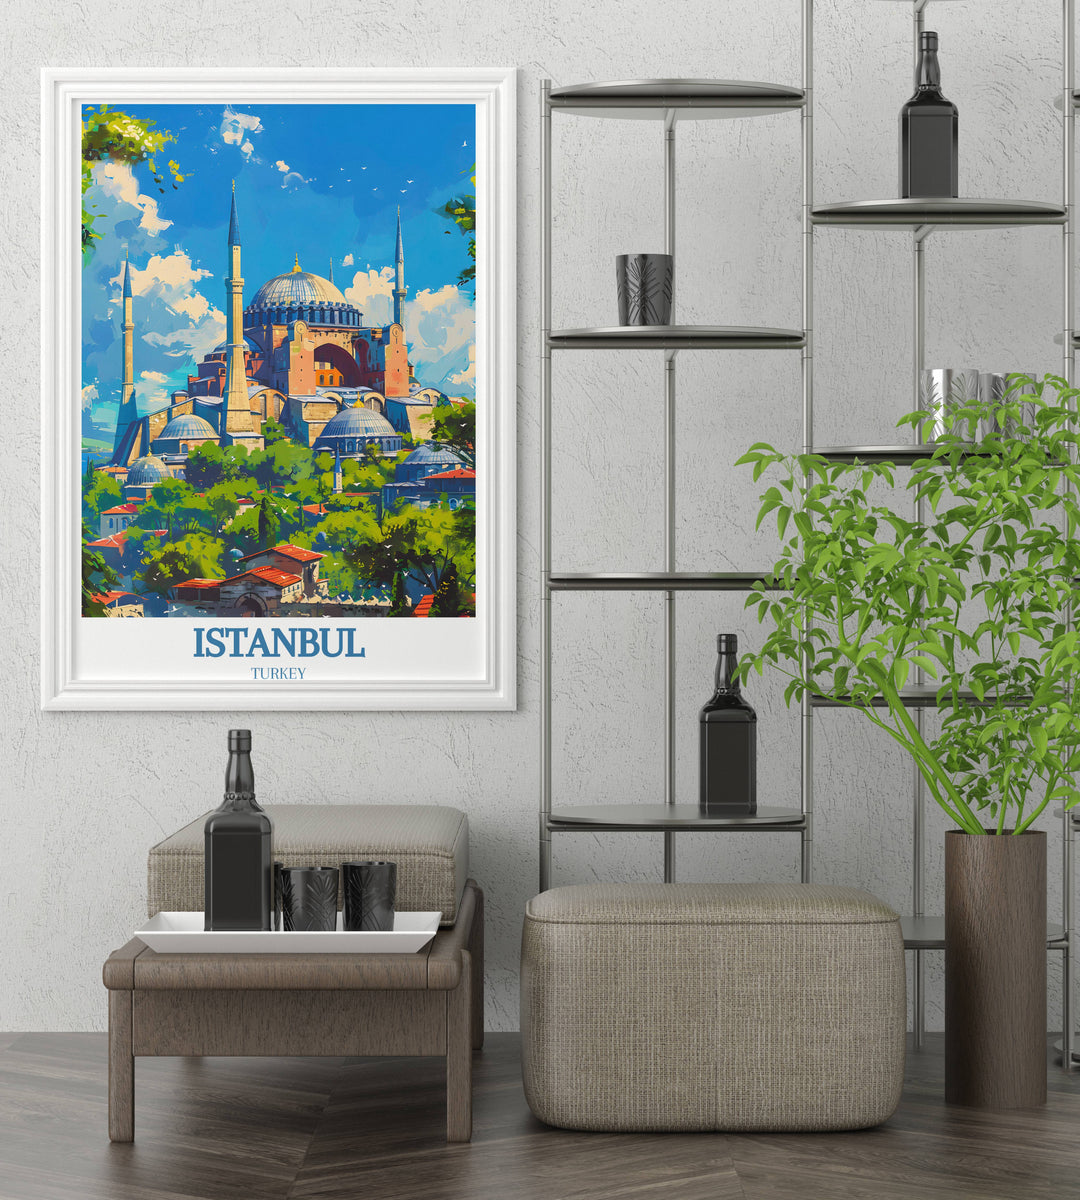 Artistic rendition of the Hagia Sophia in a tranquil morning setting, available as an Istanbul travel poster for lovers of serene landscapes.